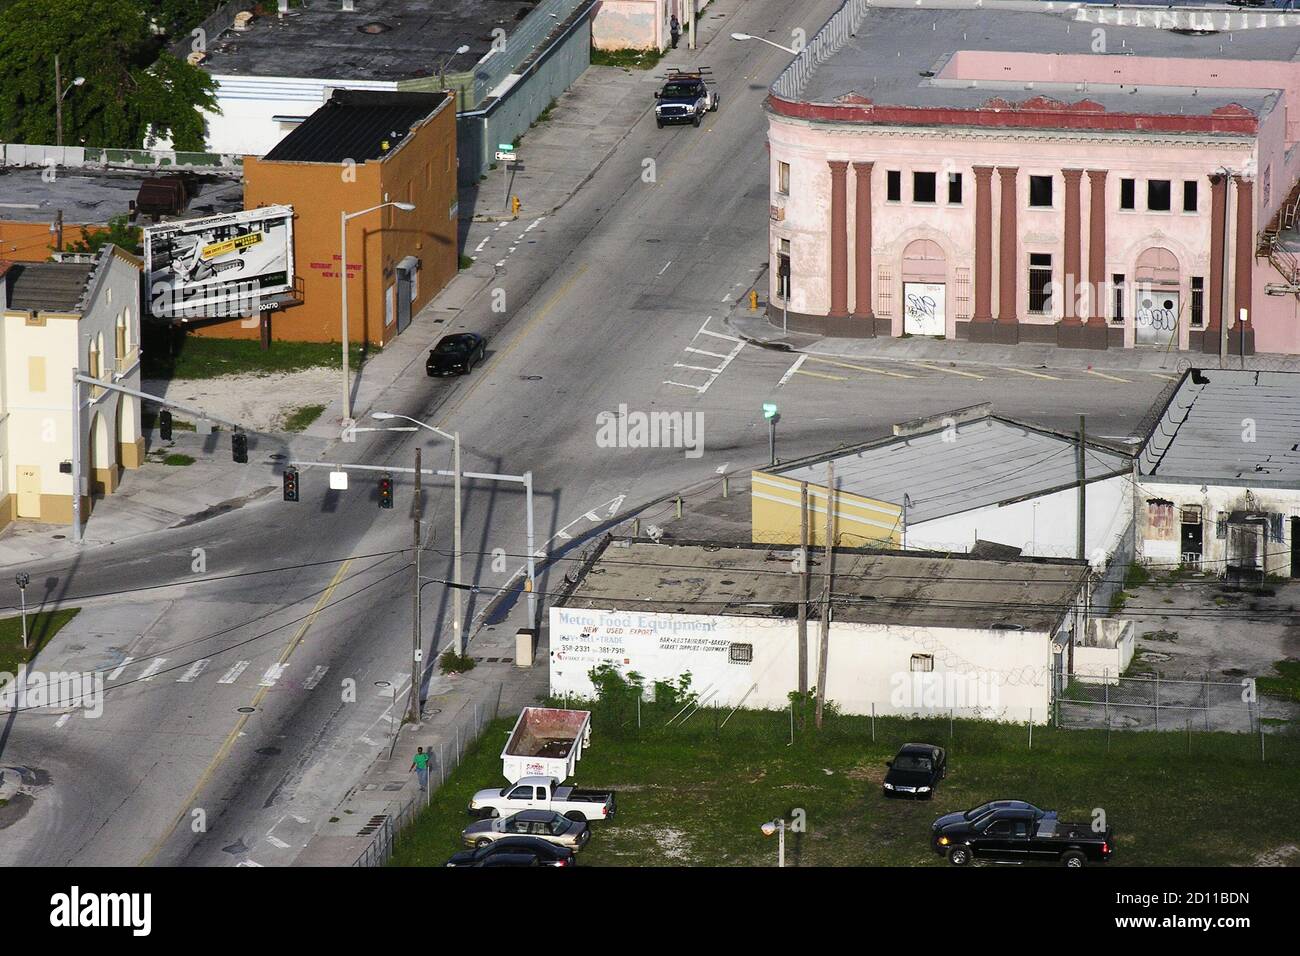 Miami, Florida, USA - September 2005:  Archival aerial view of streets and buidlings in the Overtown neighborhood near downtown Miami. Stock Photo